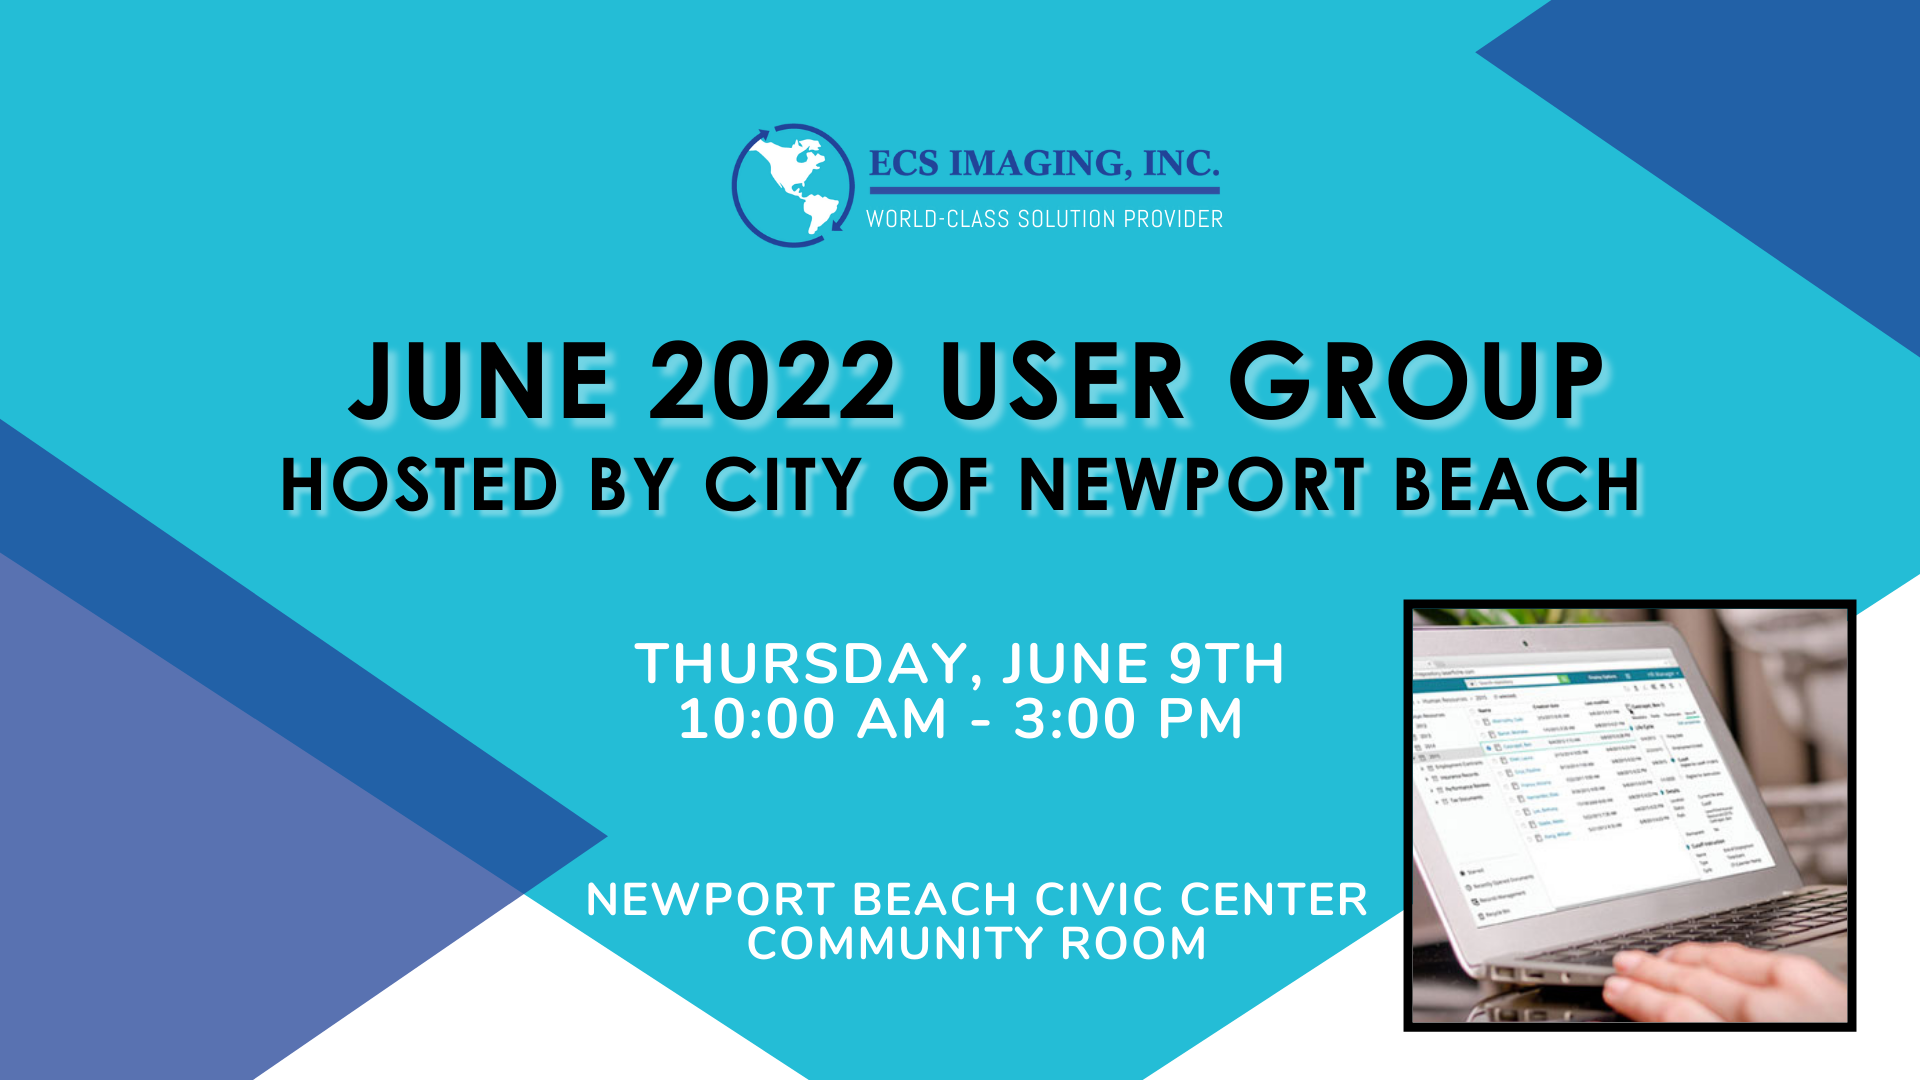 June 2022 User Group - Hosted By City of Newport Beach